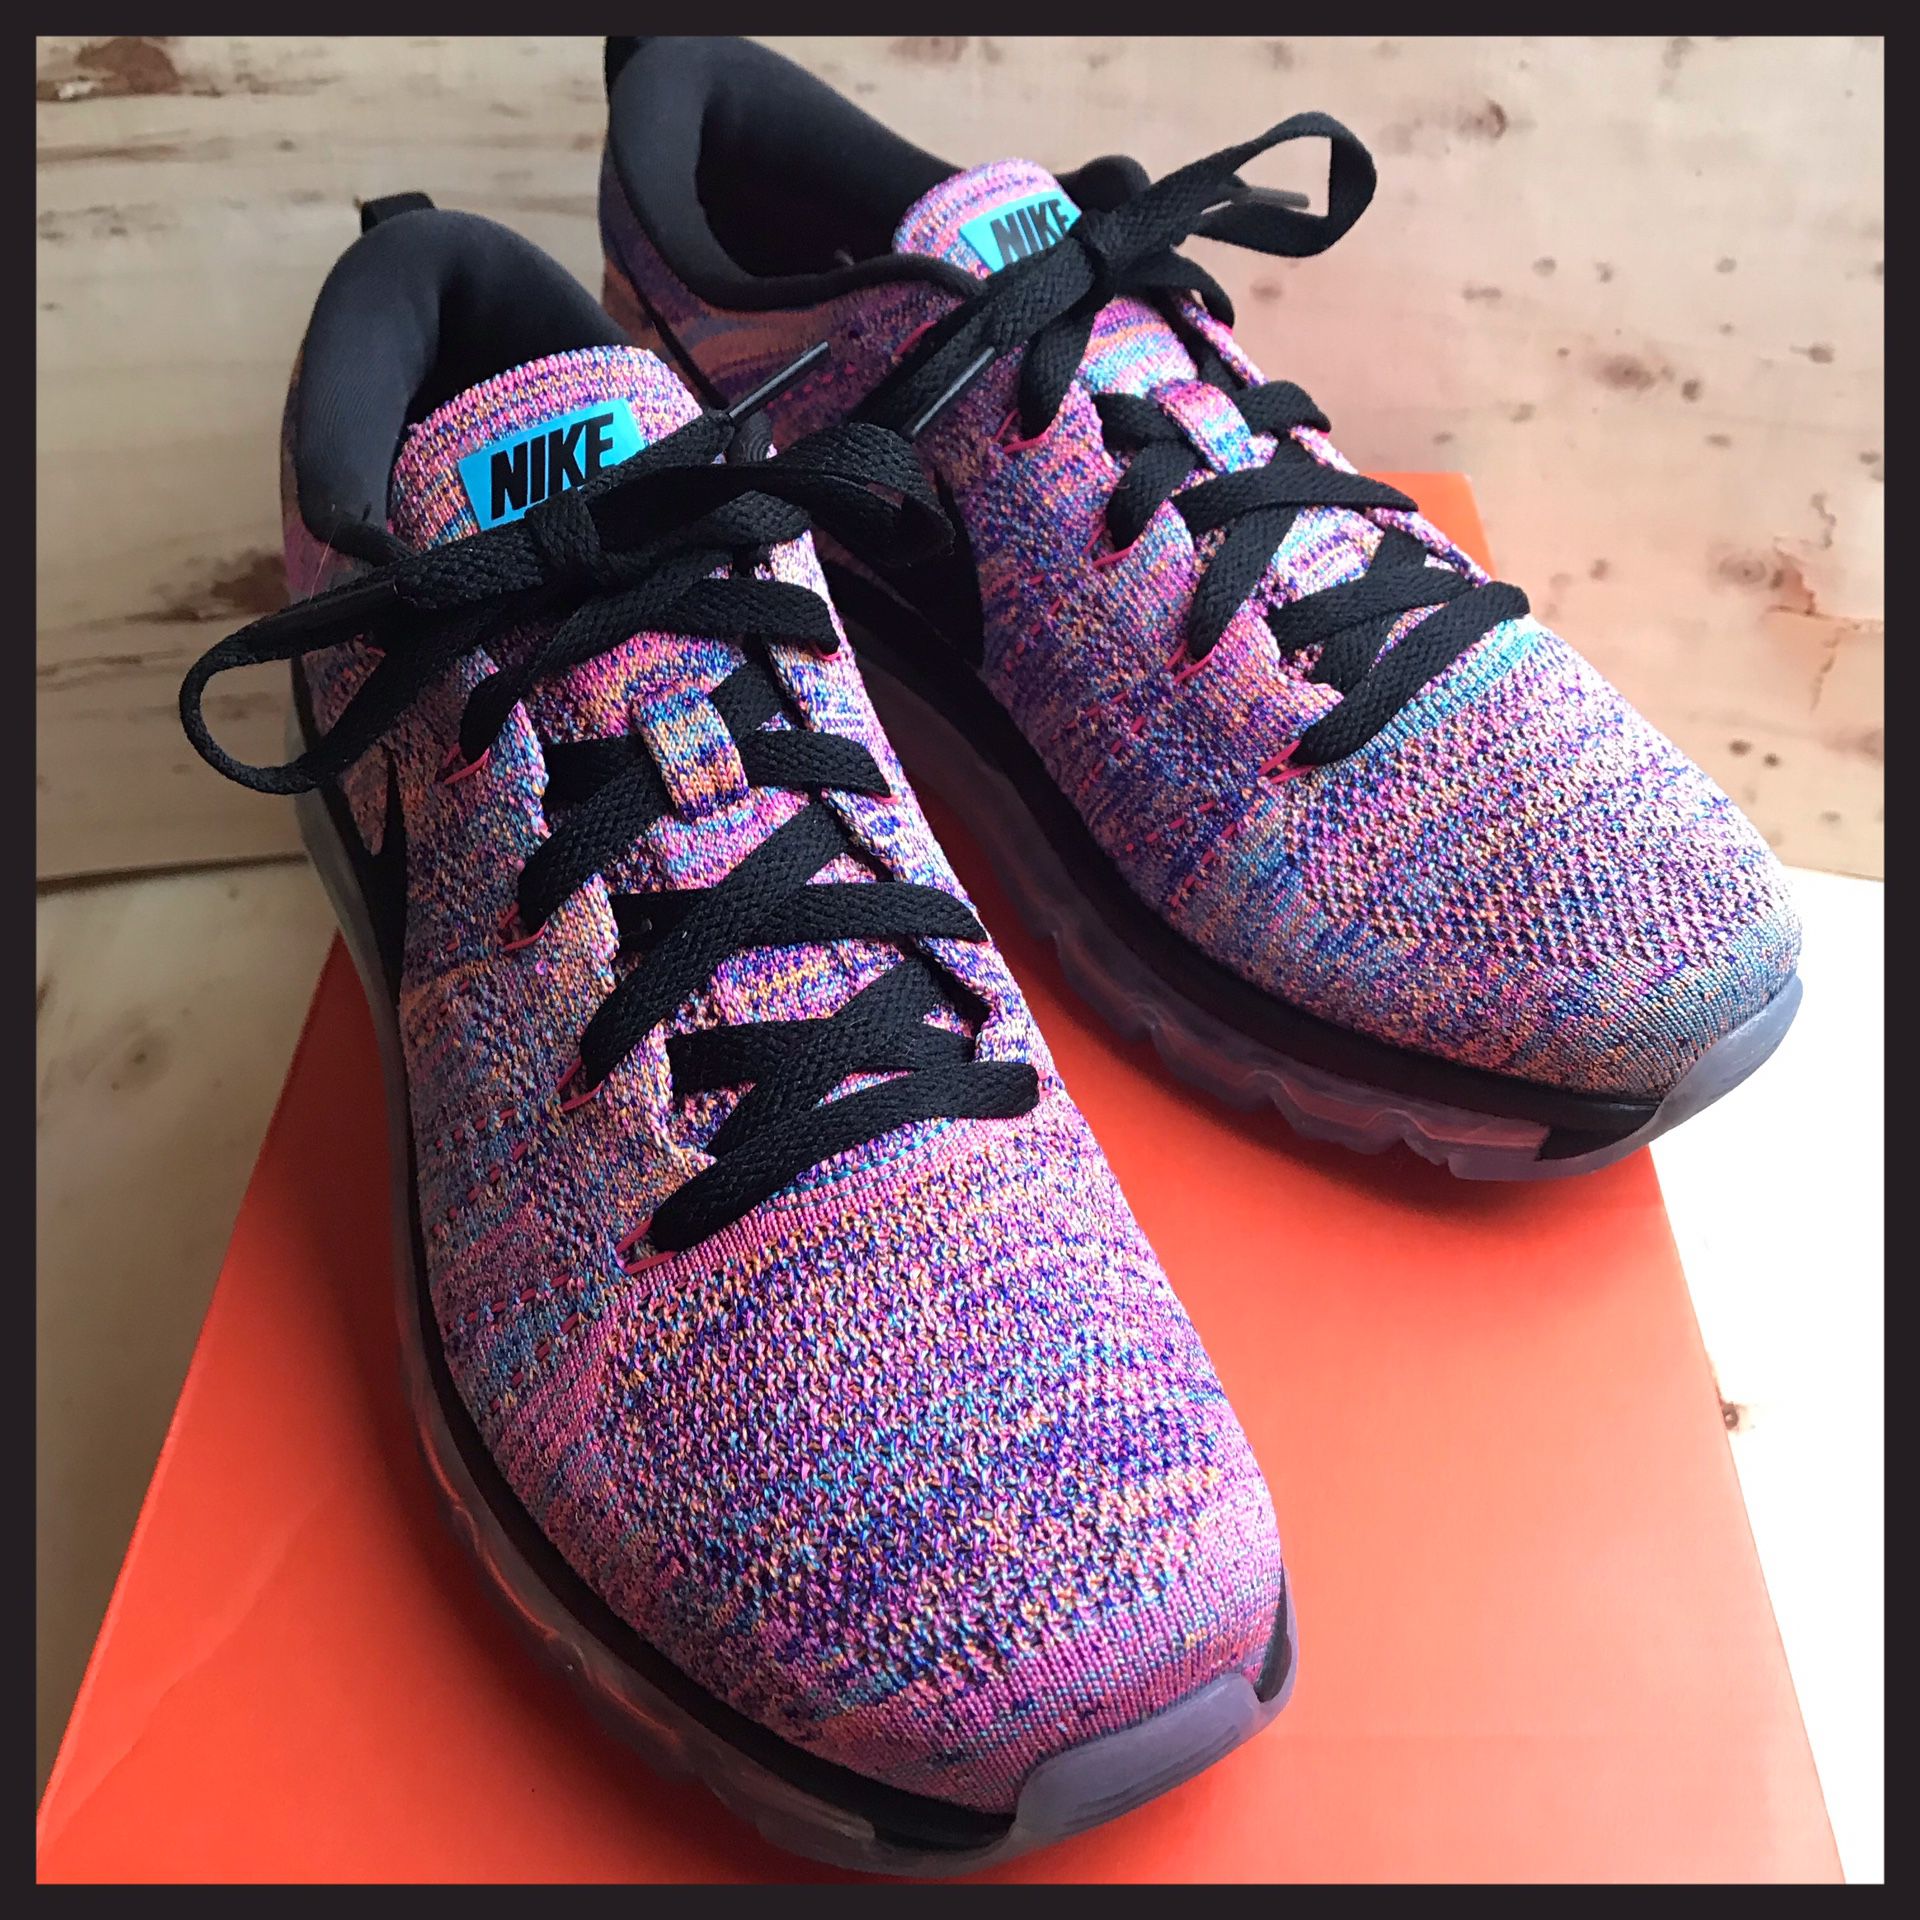 NEW Nike Flyknit Max blue, pink, black size 9 fitsole for Sale in New York, NY - OfferUp